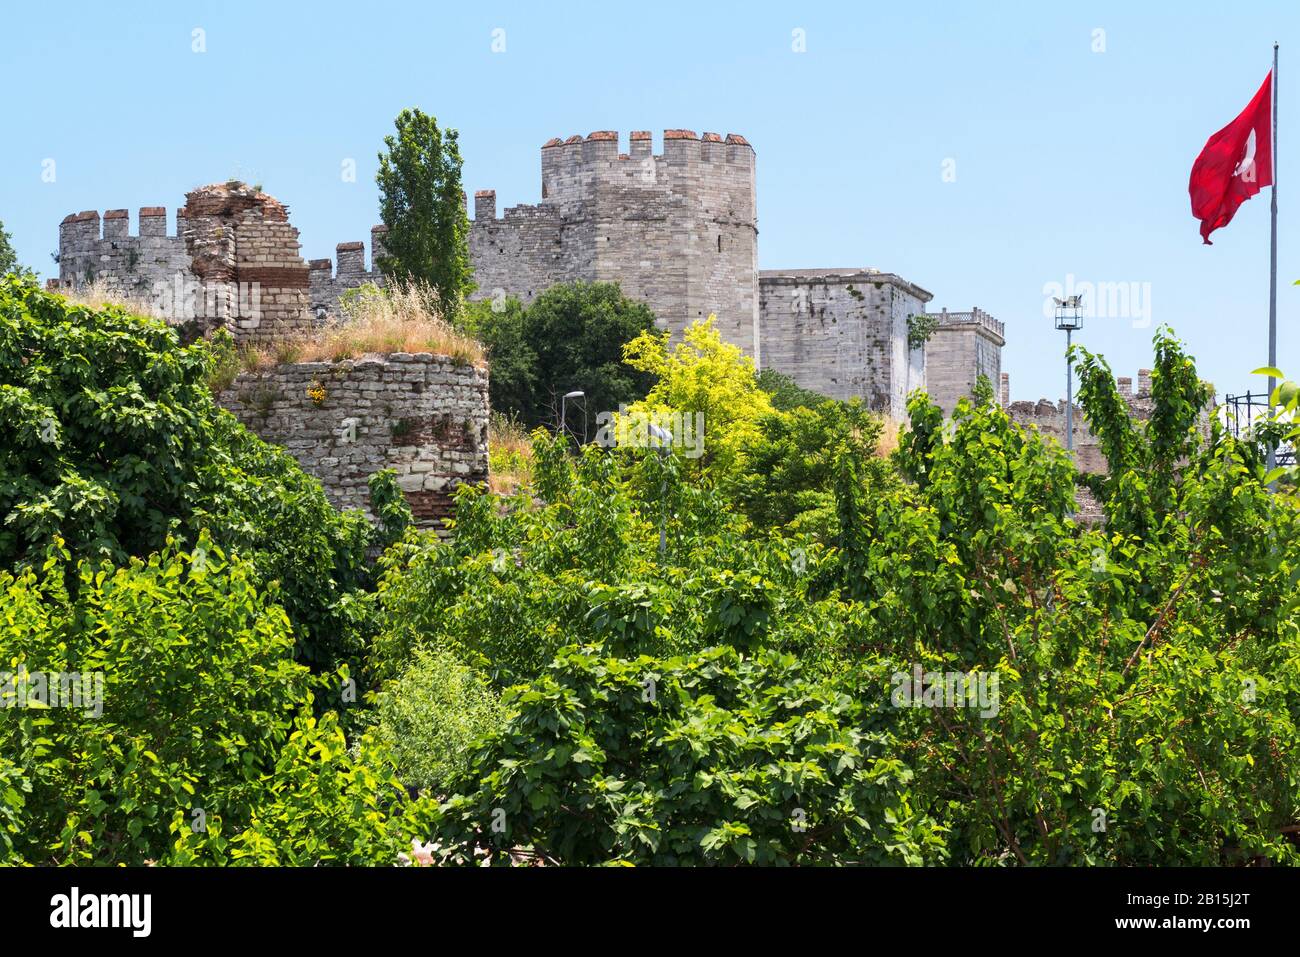 The Yedikule Fortress in Istanbul, Turkey. Yedikule fortress, or Castle of Seven Towers, is the famous fortress built by Sultan Mehmed II in 1458. Stock Photo